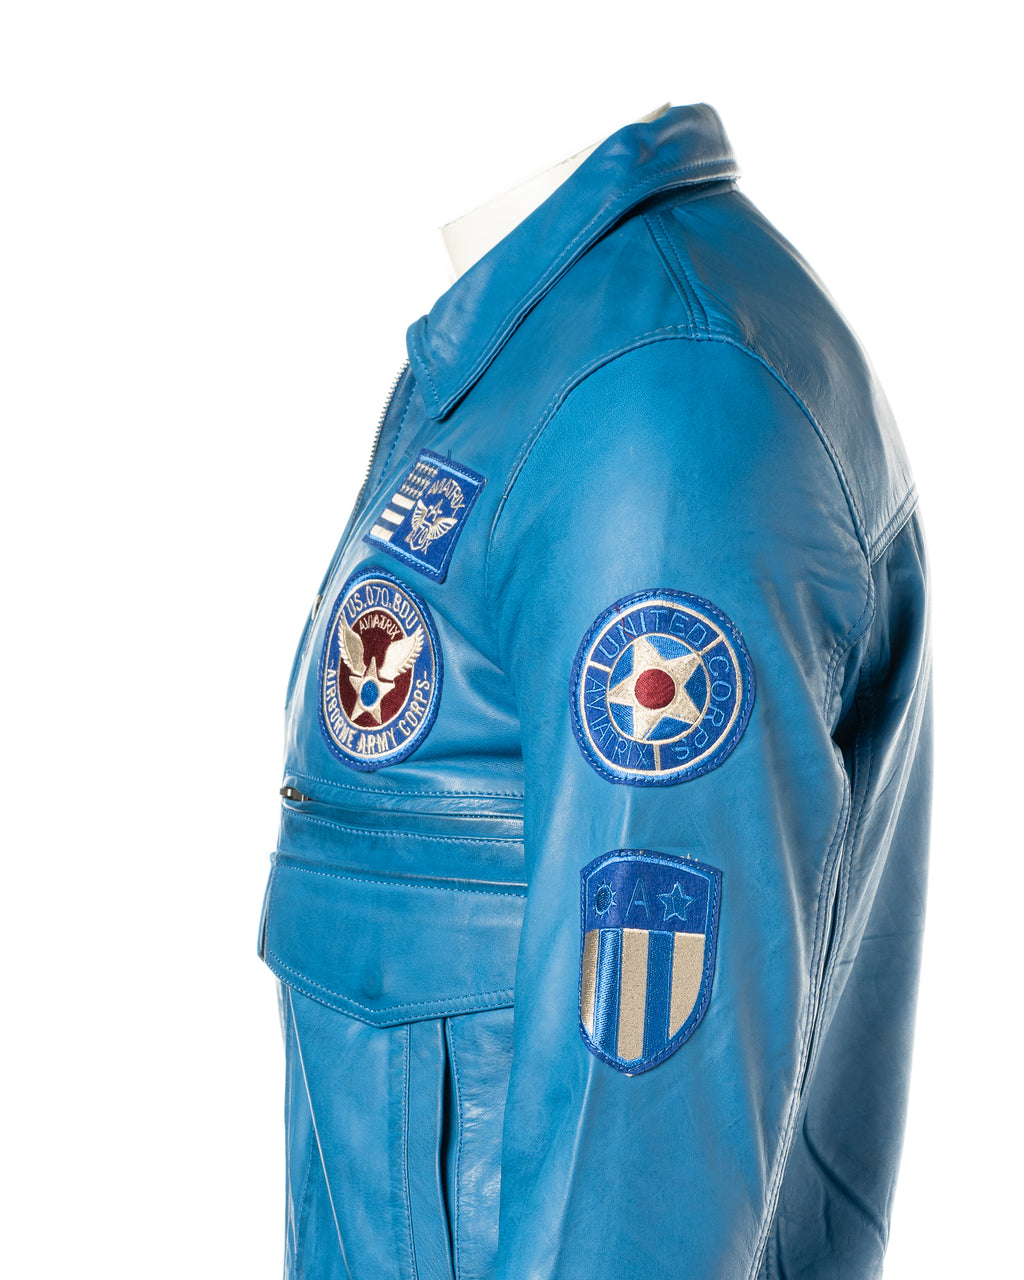 Men's Blue Aviator Pilot Flight A2 Style Leather Jacket With Badge Detail: Riccardo